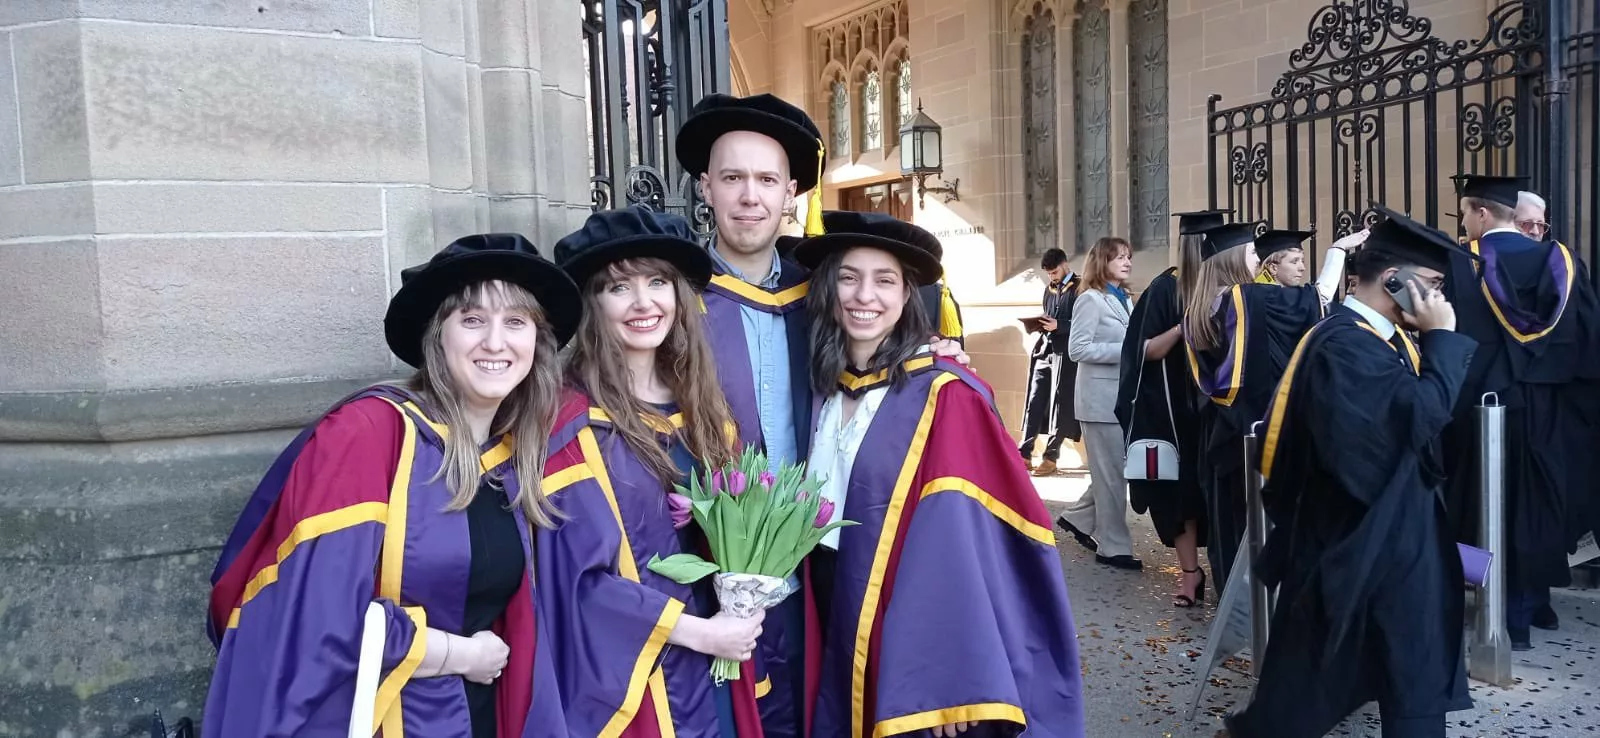 President's Doctoral Scholar Award at University of Manchester